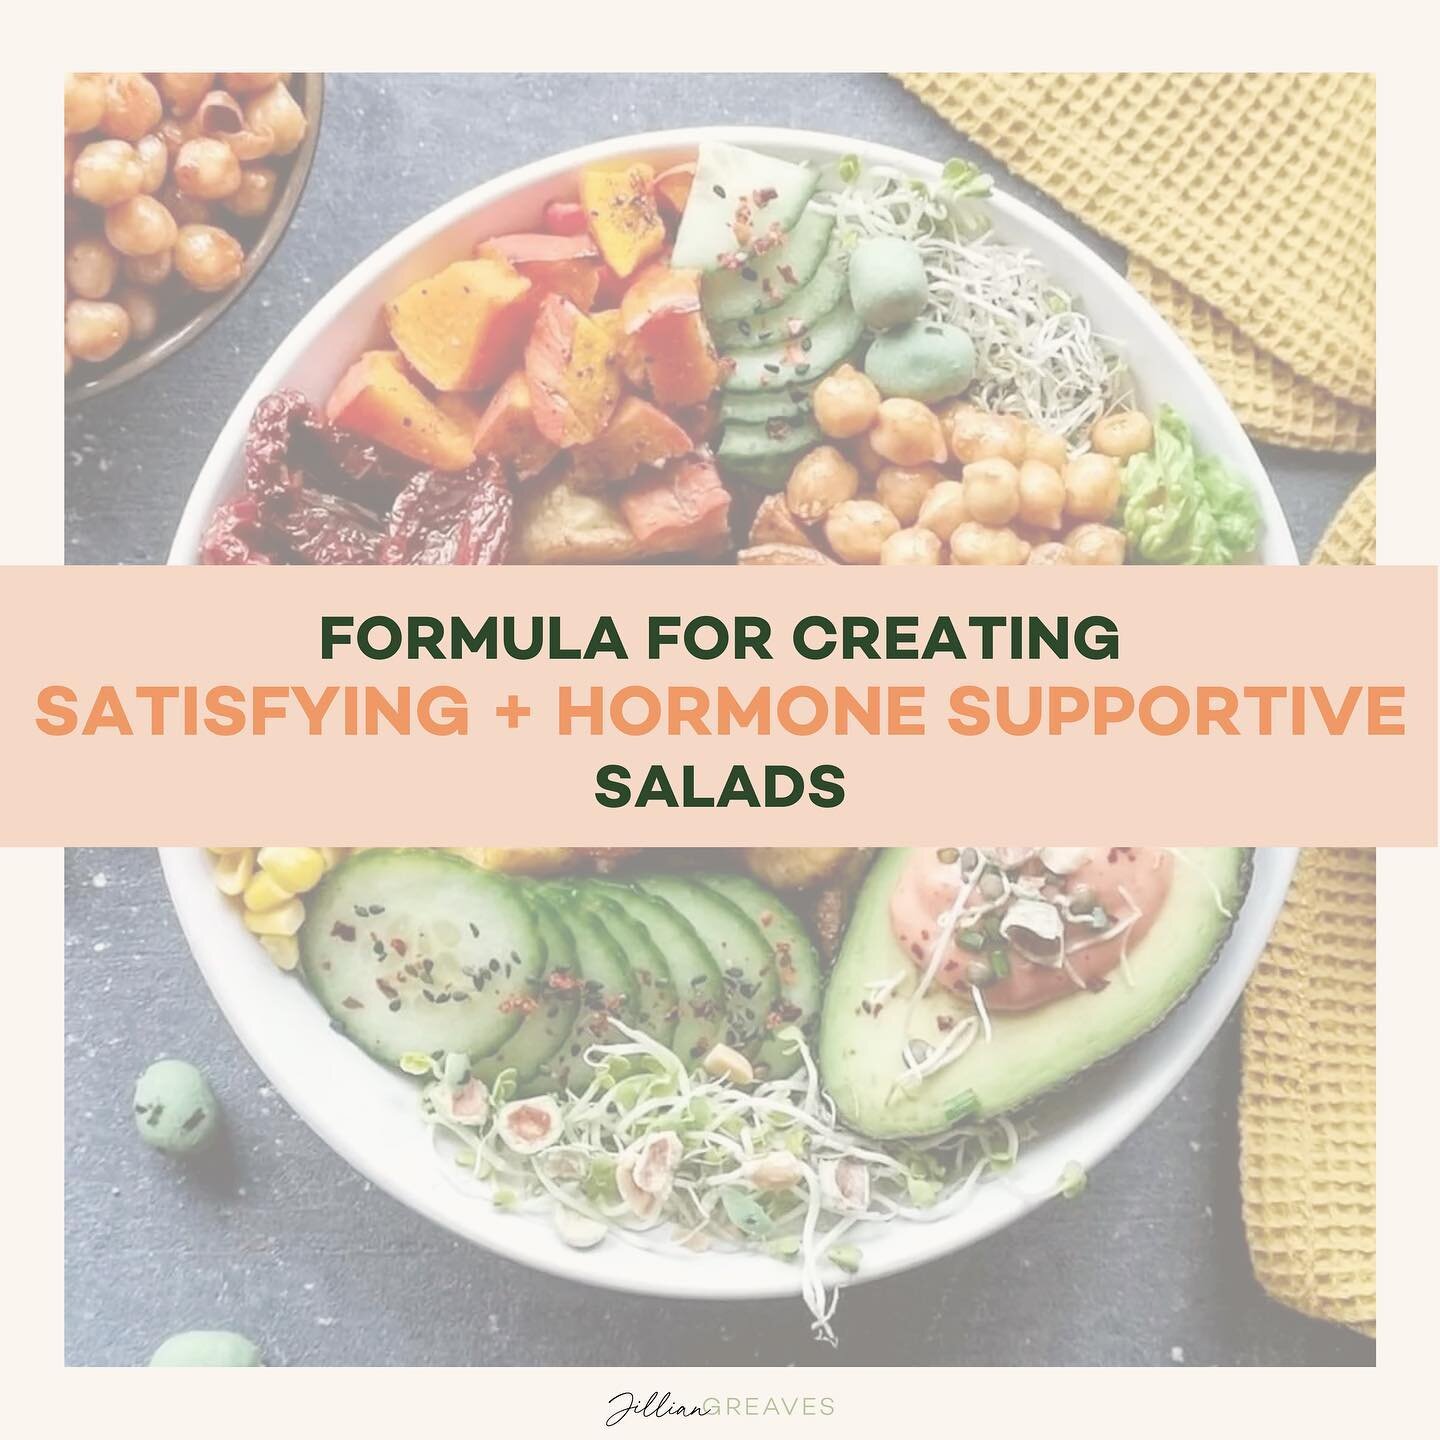 My go-to formula for creating satisfying + hormone supportive salads at home!

What does a hormone supportive meal include? 👇🏻
✅ Protein (25+ grams) promotes satiety &amp; fullness, stabilizes blood sugar, &amp; provides amino acids that support ph